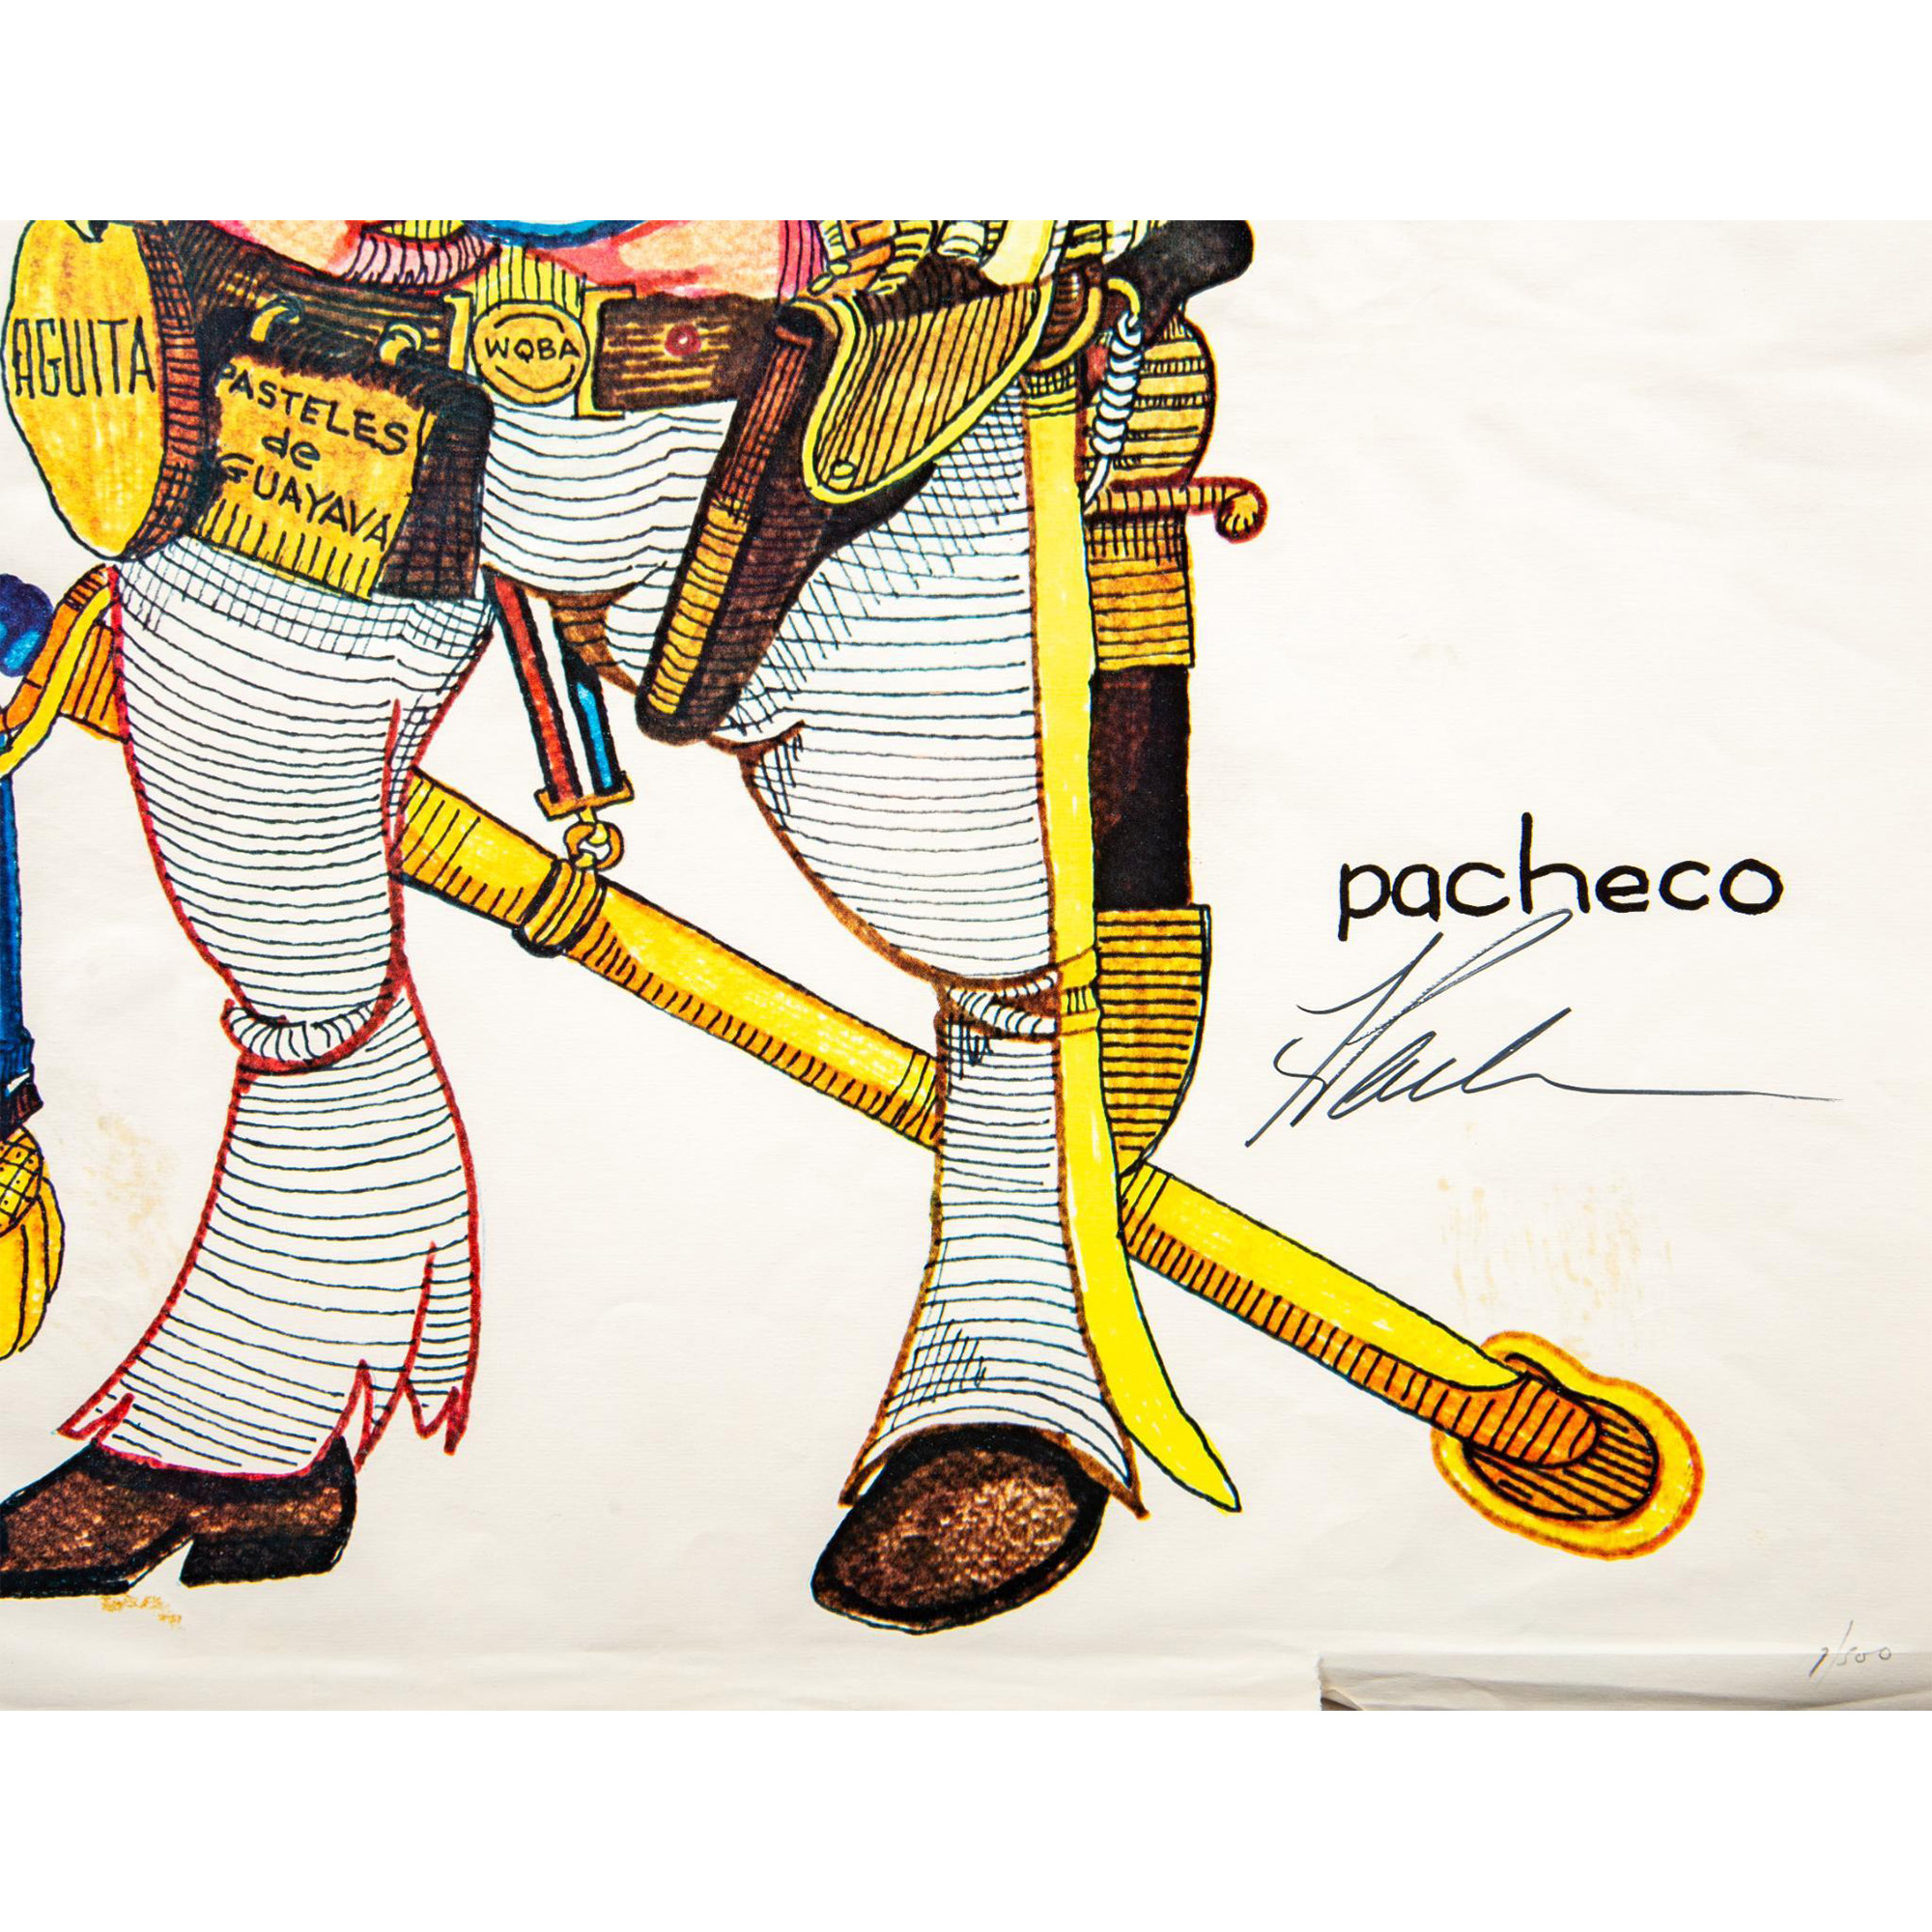 Pacheco, Two Original Color Lithographs on Paper, Signed - Image 7 of 9